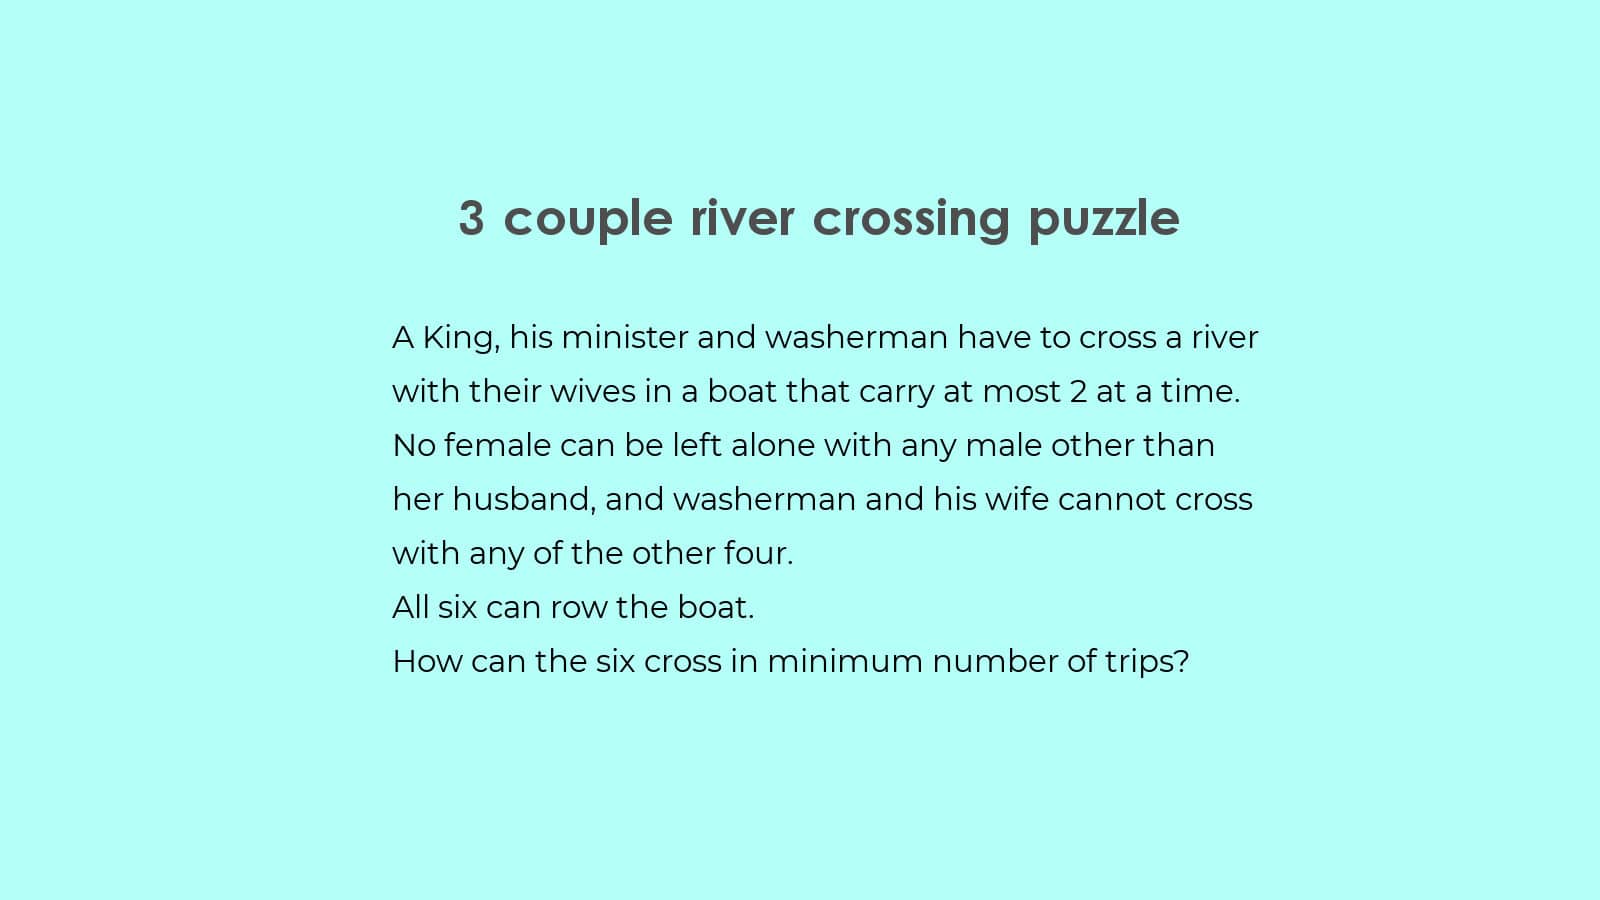 3 couples river crossing puzzle